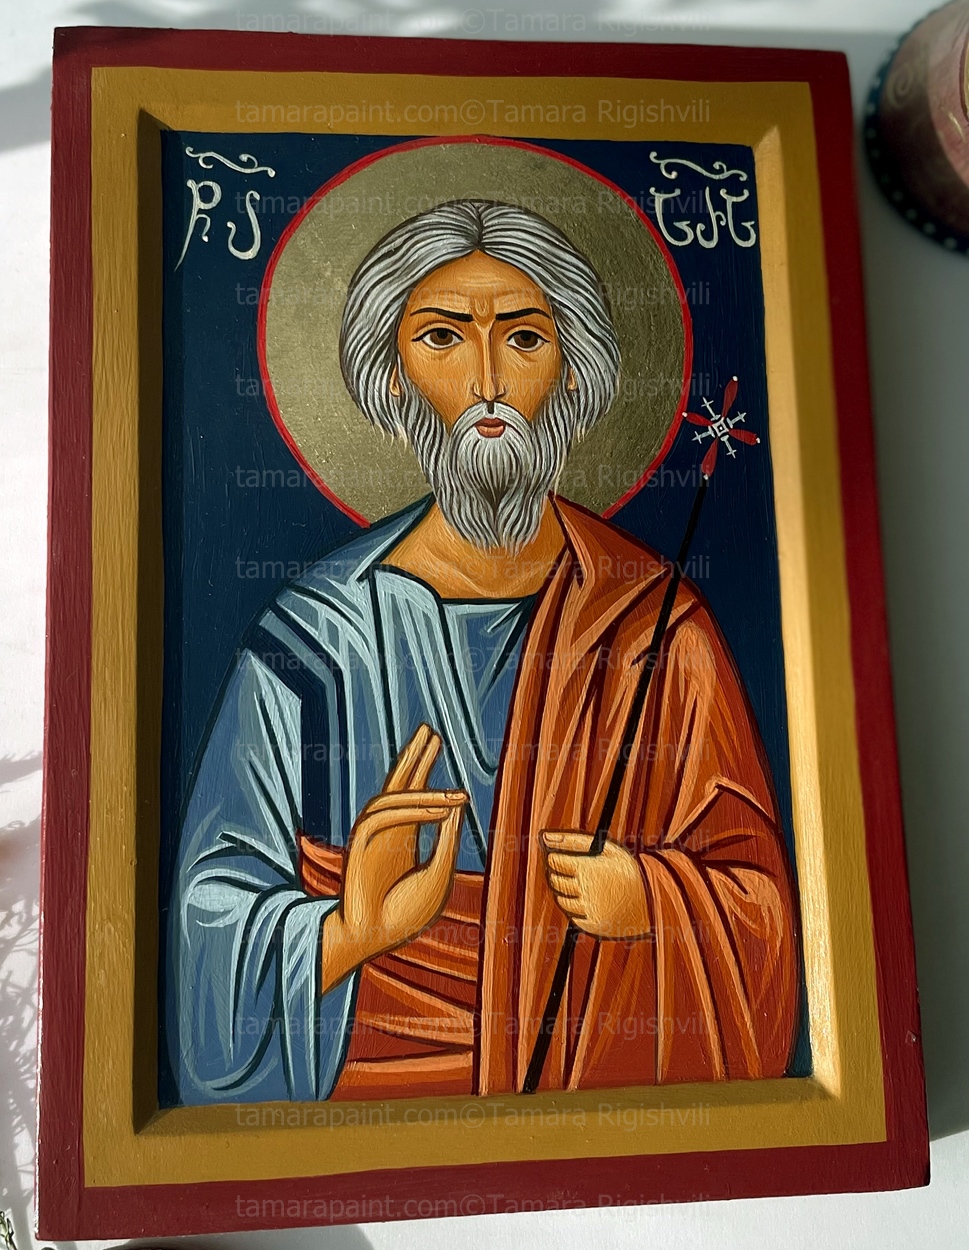 Andrew the Apostle -  first follower of Jesus, he is known for his missionary travels, where he preached in regions around the Mediterranean area. During that time, he established an early orthodox church in the city of Byzantium, also in Georgia and Kiev, by Icon Painter Tamara Rigishvili